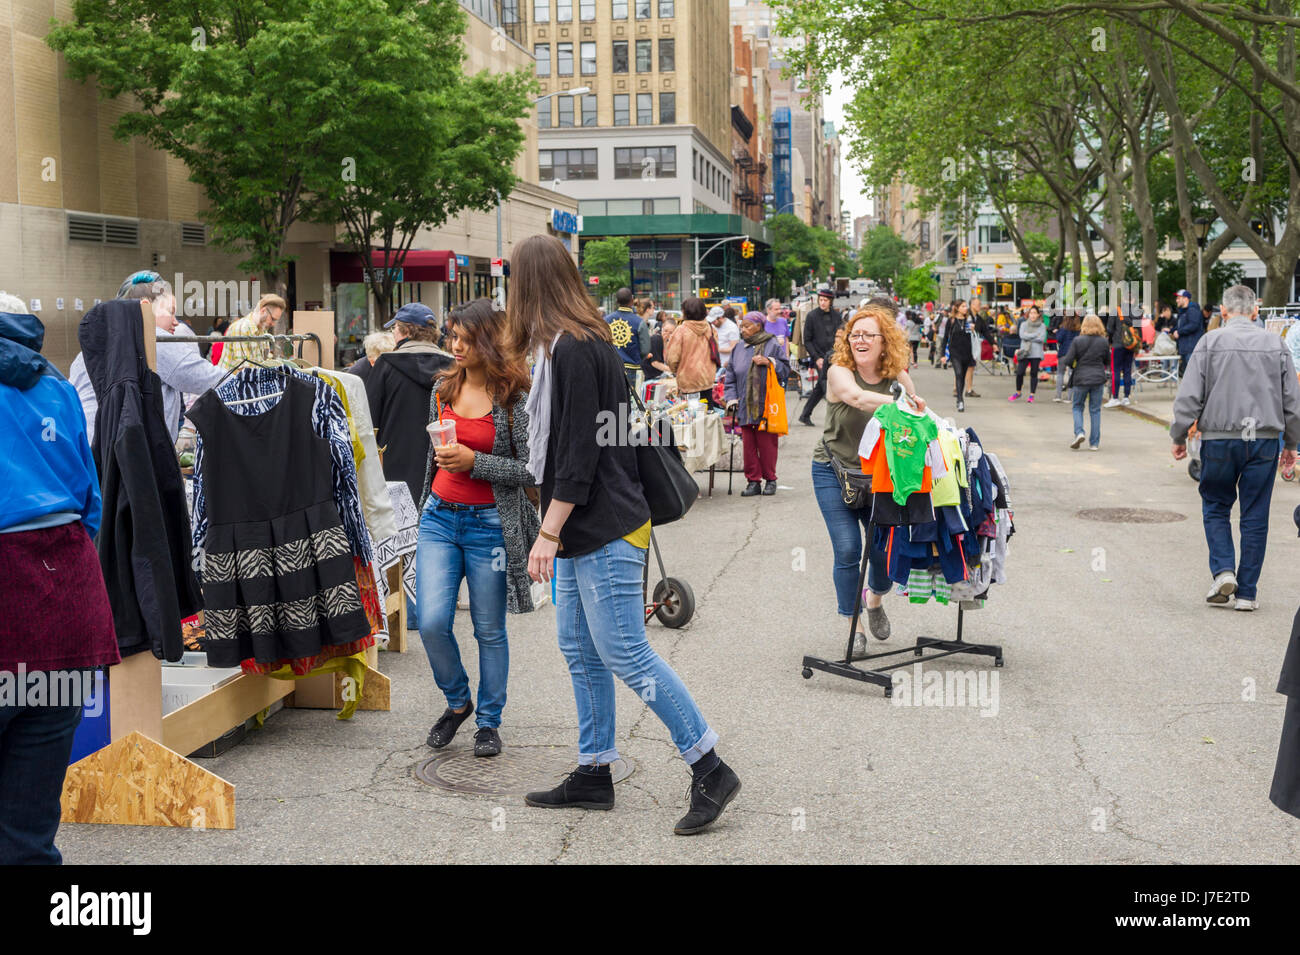 Shoppers search for bargains at the humongous Penn South Flea Market in the New York neighborhood of Chelsea on Saturday, May 20, 2017. The flea market appears like Brigadoon, only once every year, and the residents of the 20 building Penn South cooperatives have a closet cleaning extravaganza. Shoppers from around the city come to the flea market which attracts thousands passing through.  (© Richard B. Levine) Stock Photo